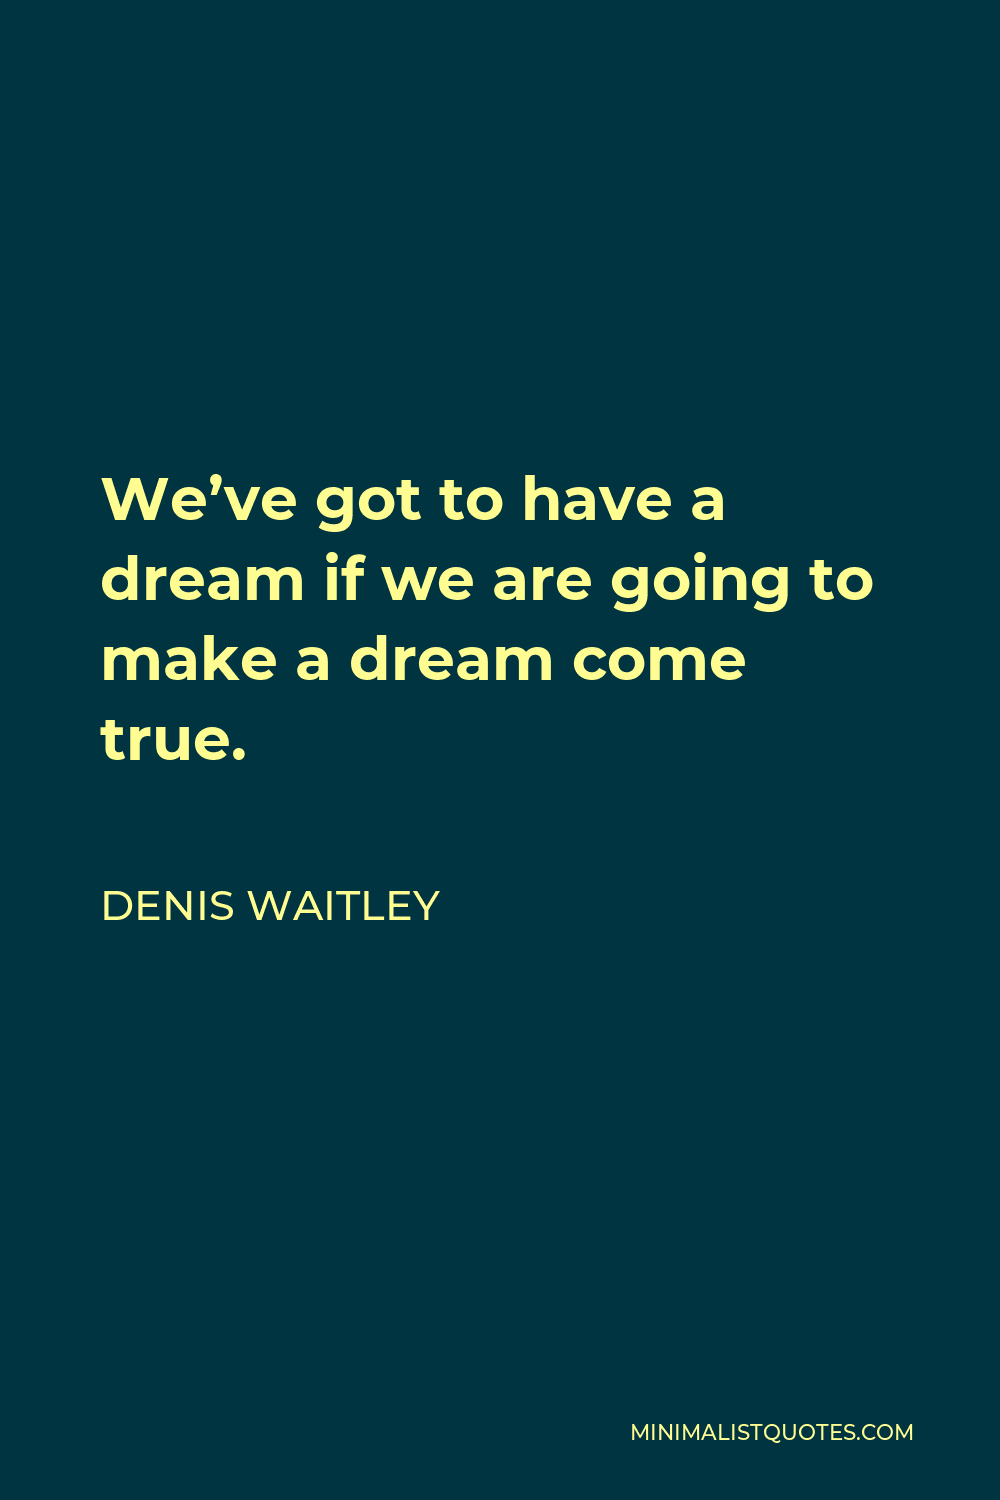 Denis Waitley Quote - We’ve got to have a dream if we are going to make a dream come true.